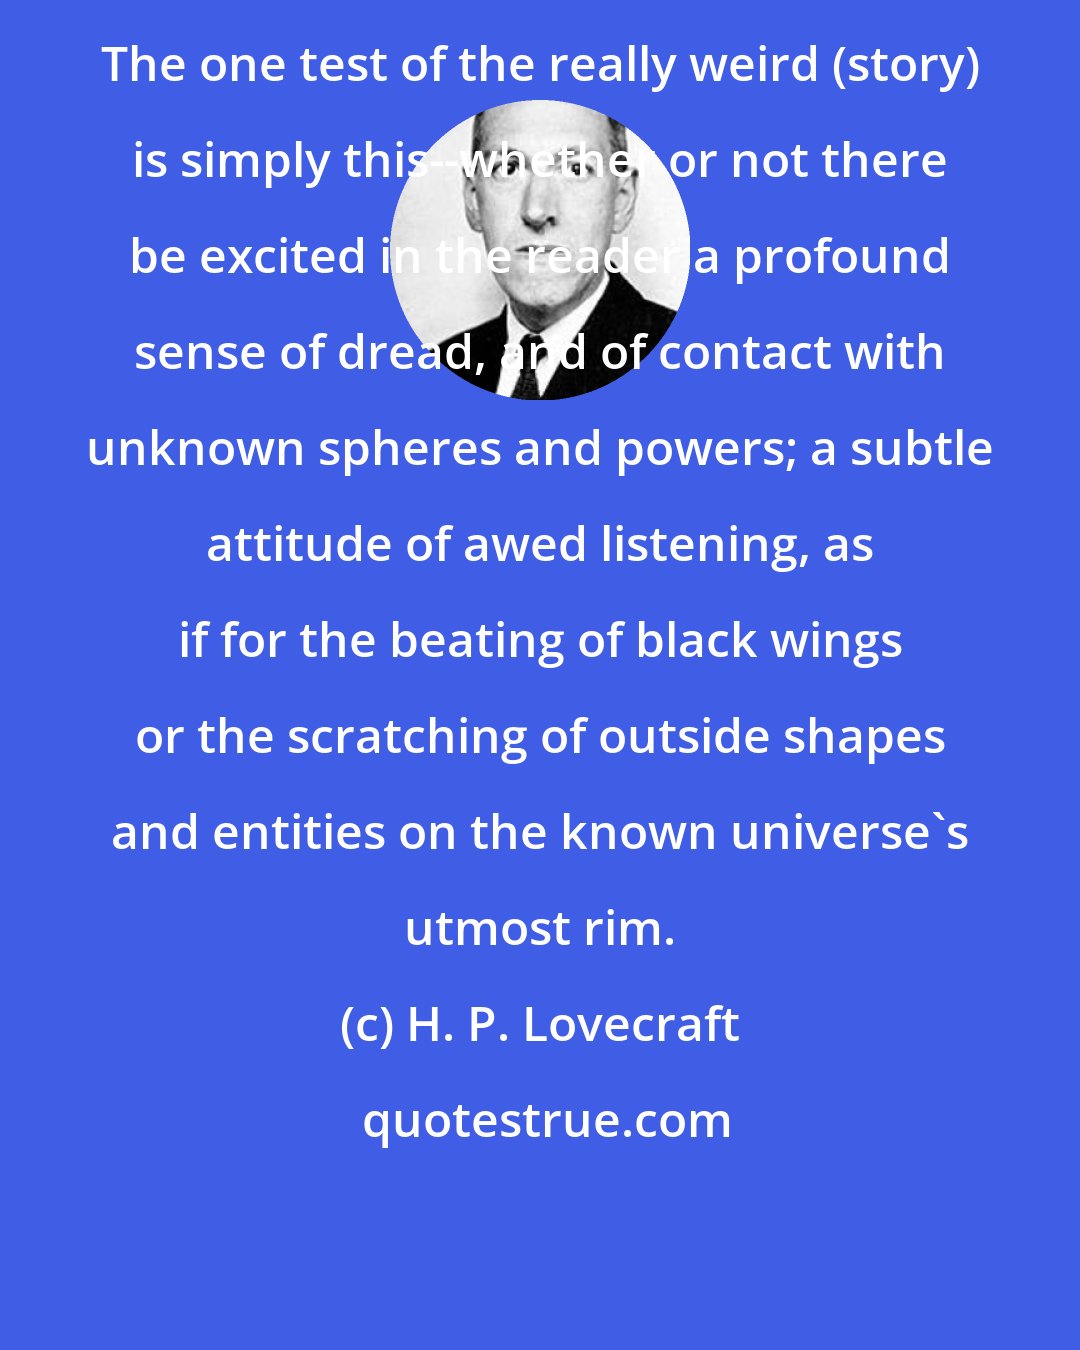 H. P. Lovecraft: The one test of the really weird (story) is simply this--whether or not there be excited in the reader a profound sense of dread, and of contact with unknown spheres and powers; a subtle attitude of awed listening, as if for the beating of black wings or the scratching of outside shapes and entities on the known universe's utmost rim.